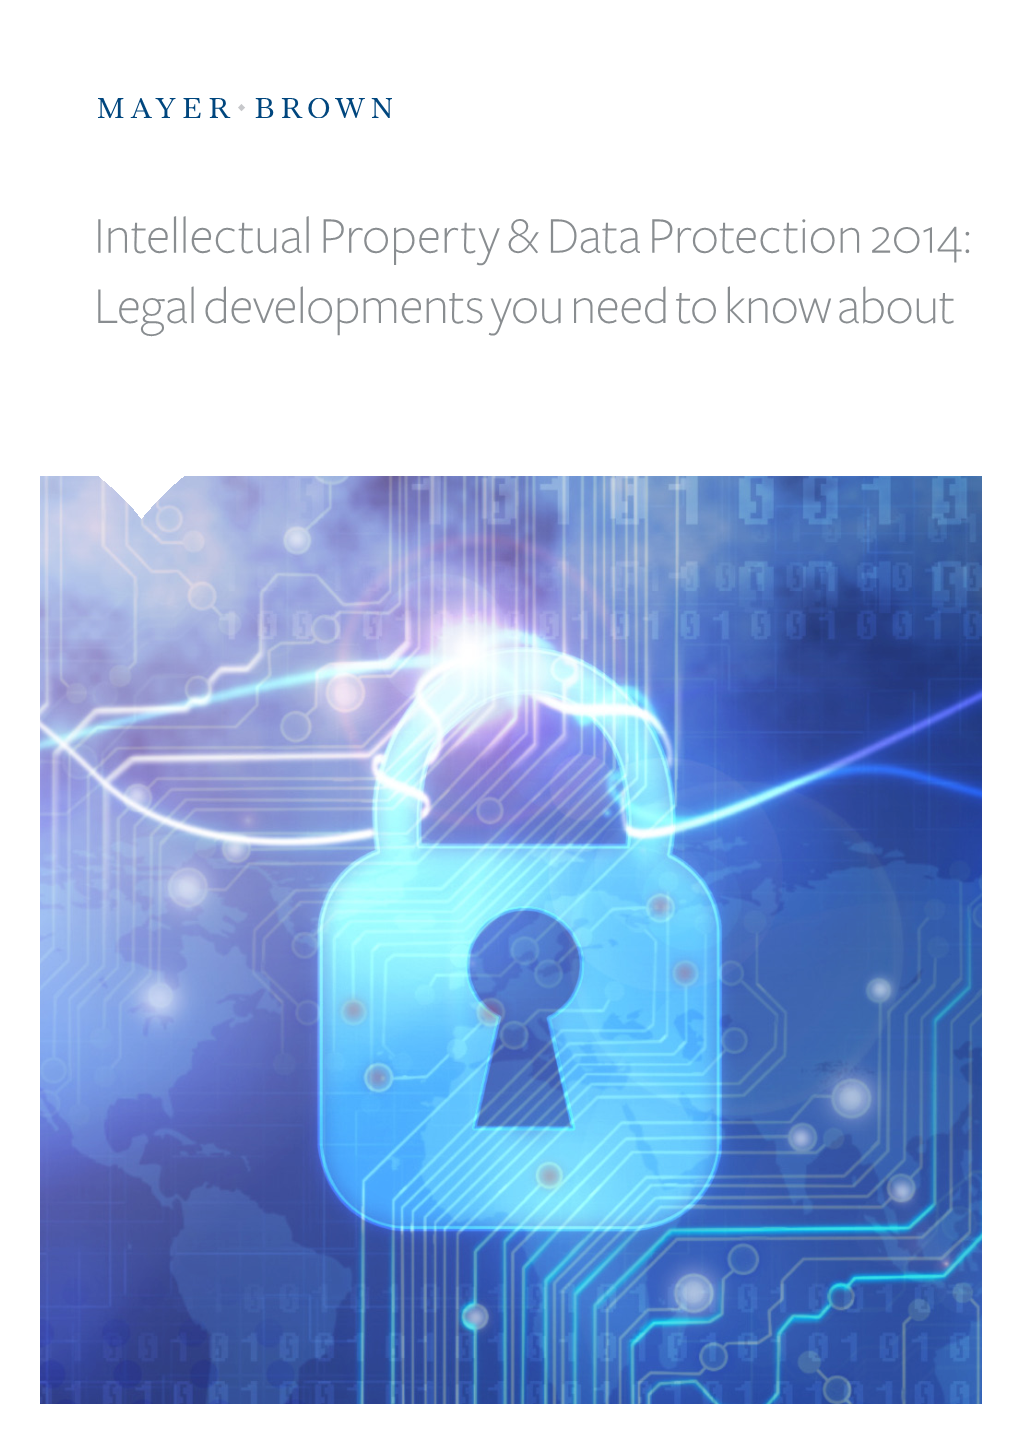 Intellectual Property & Data Protection 2014